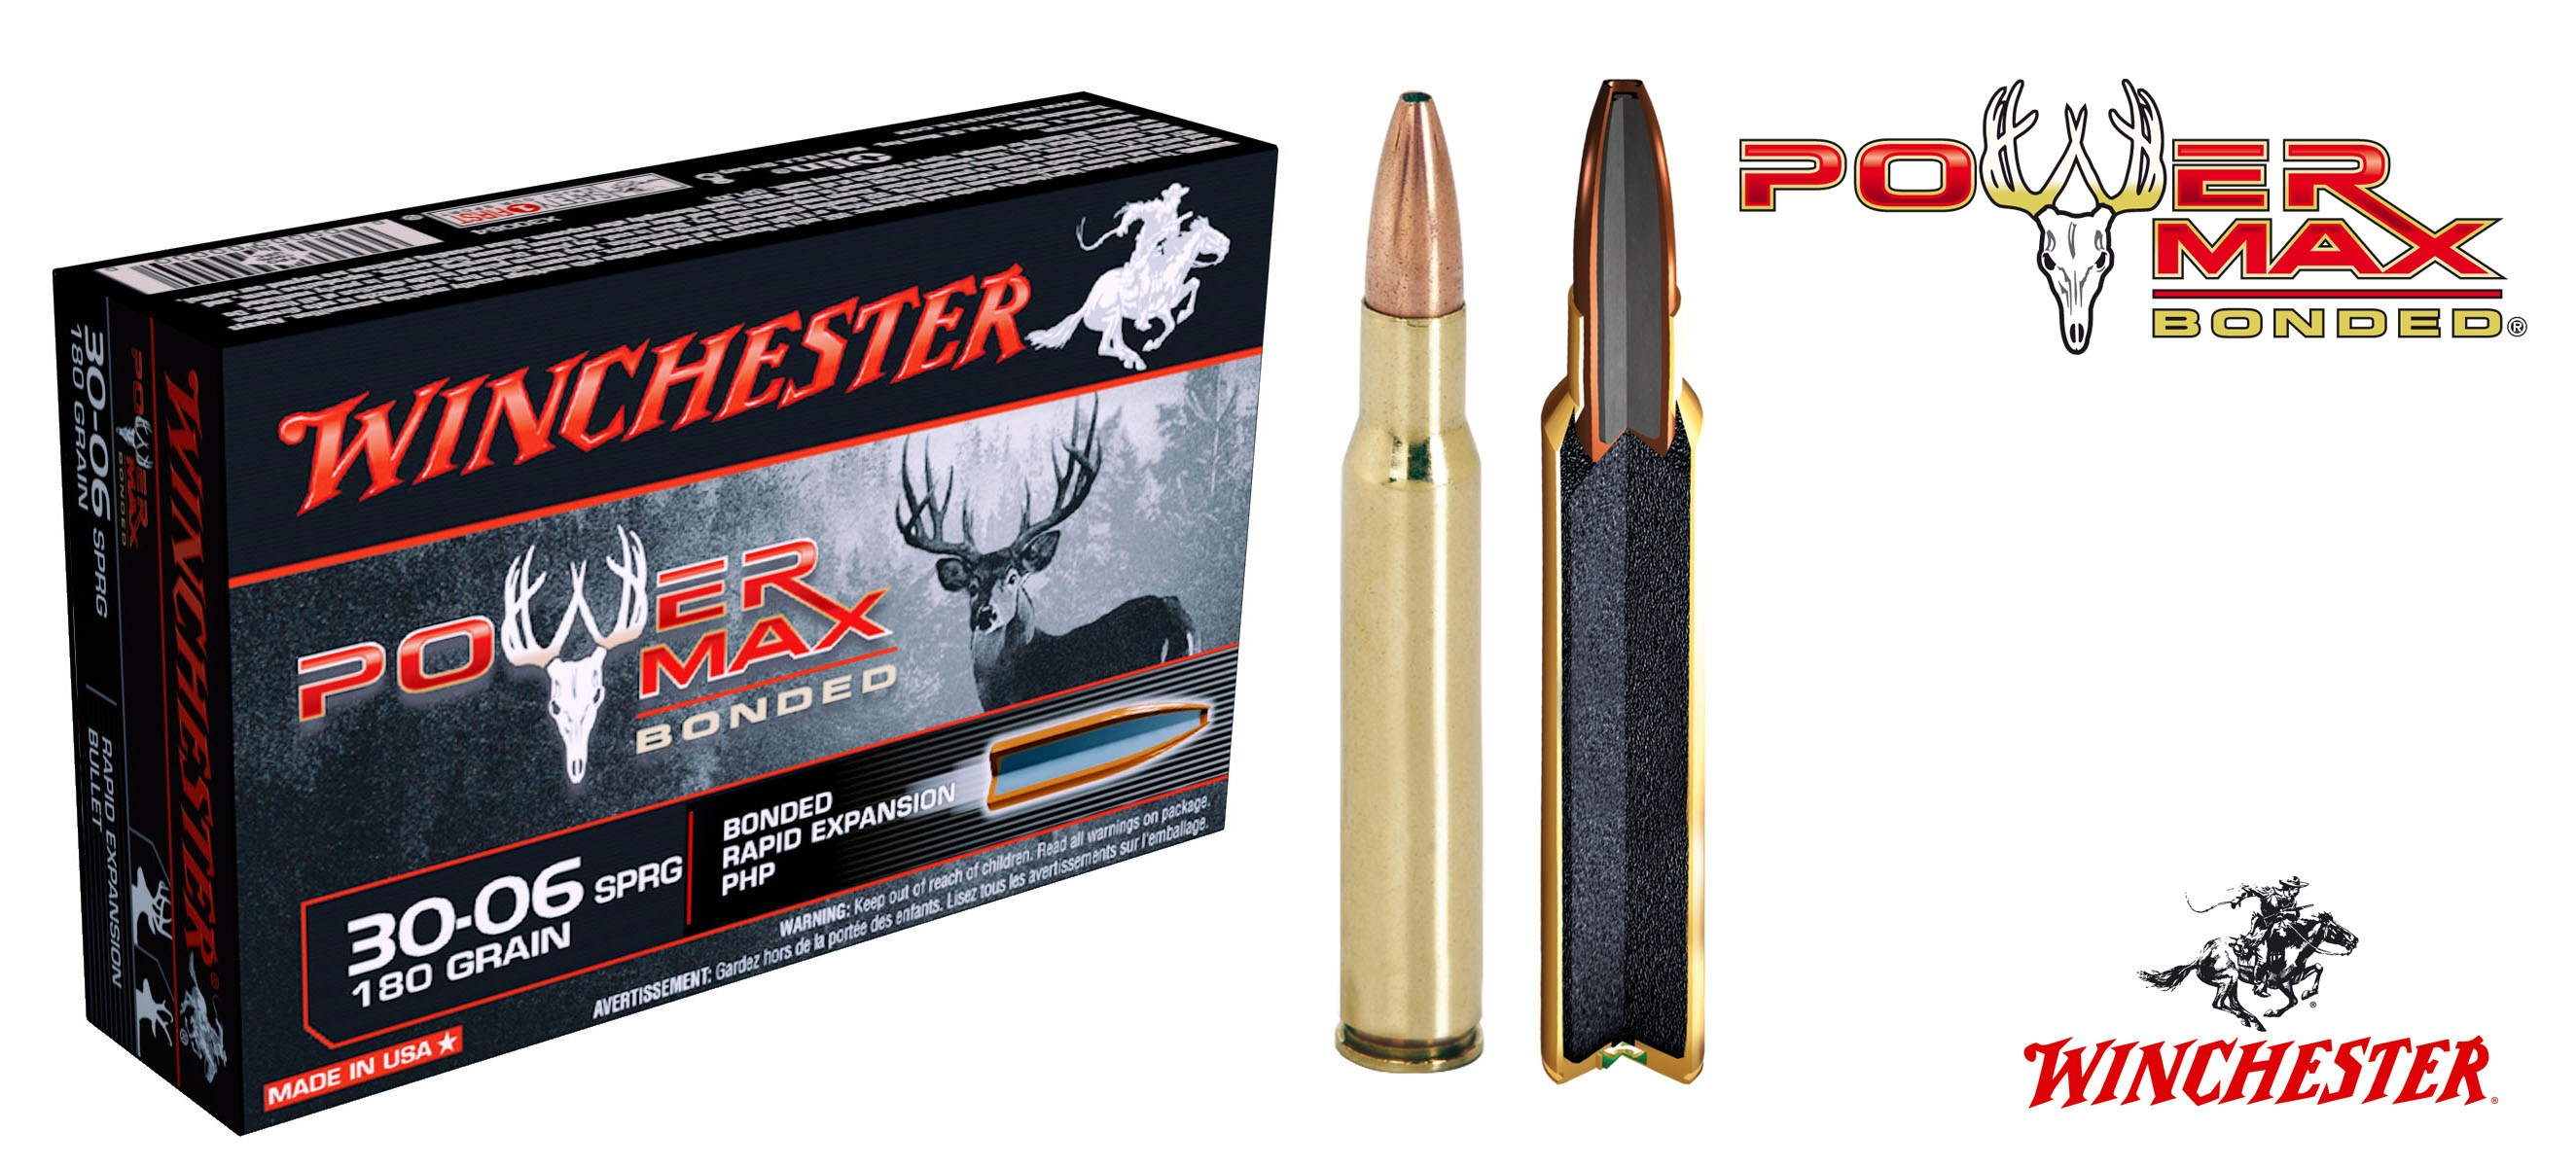 Патрон 30-06Sprg Winchester Power max bonded PHP 11,66г